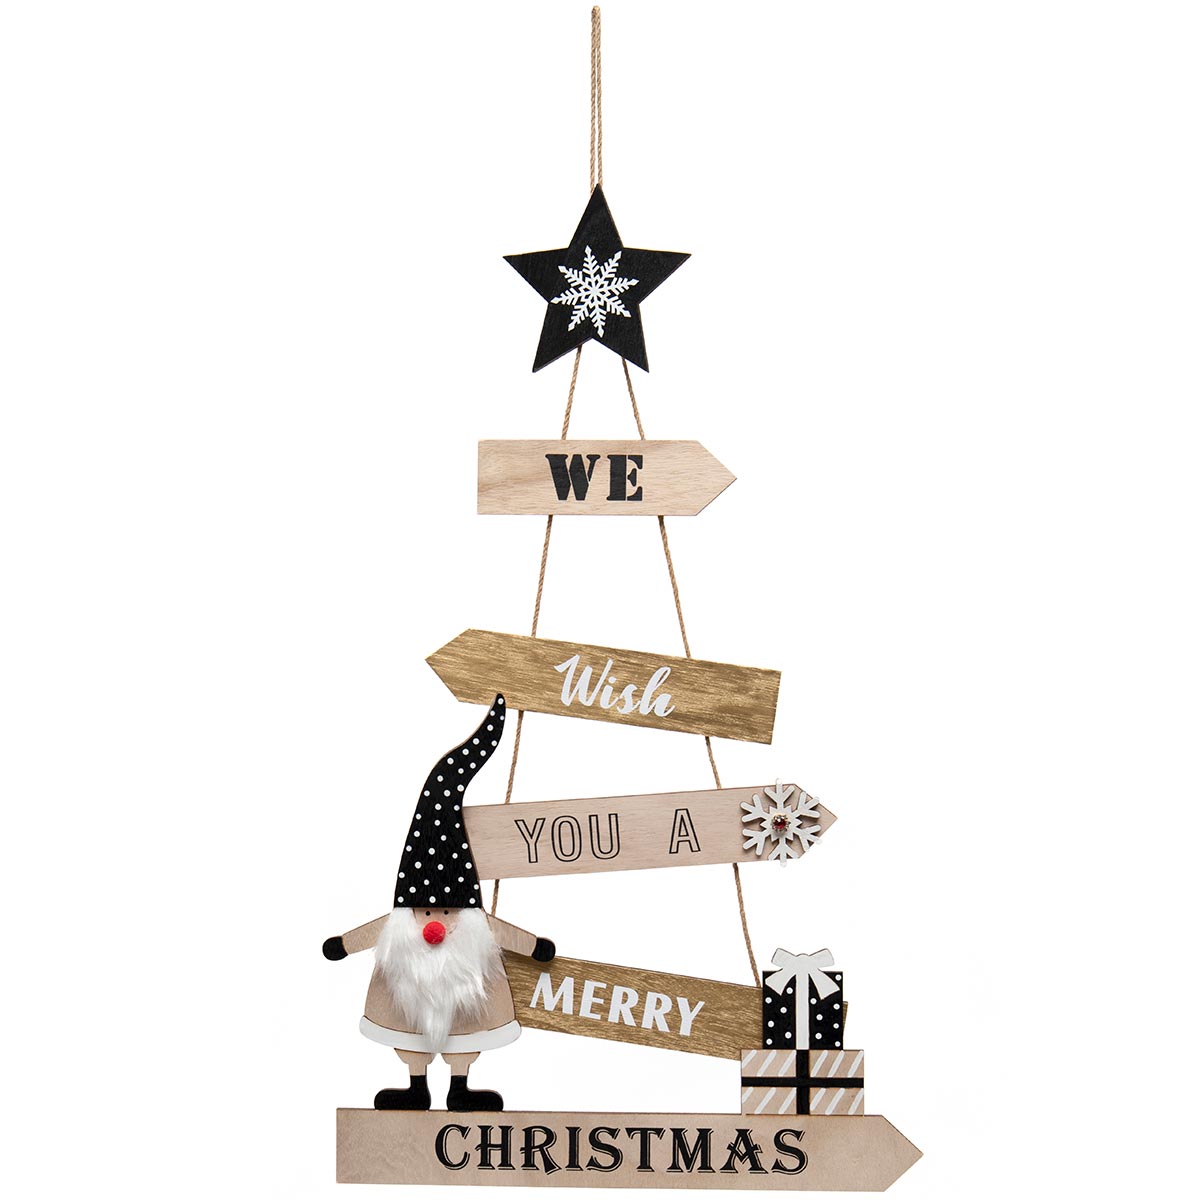 !WE WISH YOU A MERRY CHRISTMAS GNOME WOOD HANGING SIGN f33